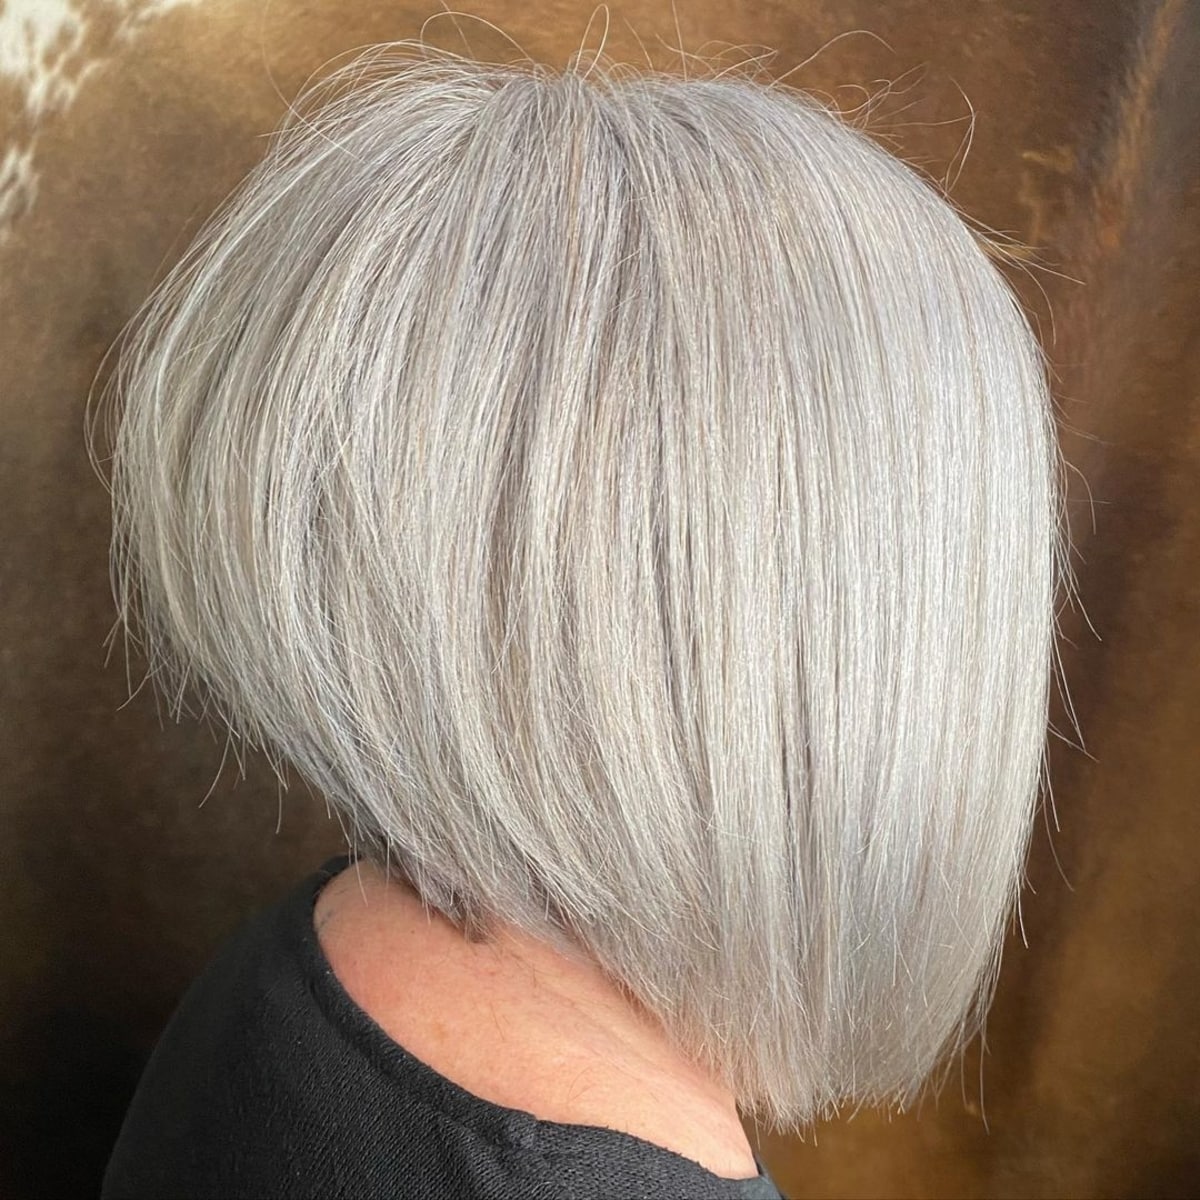 Dramatic high-stacked bob for women over 50